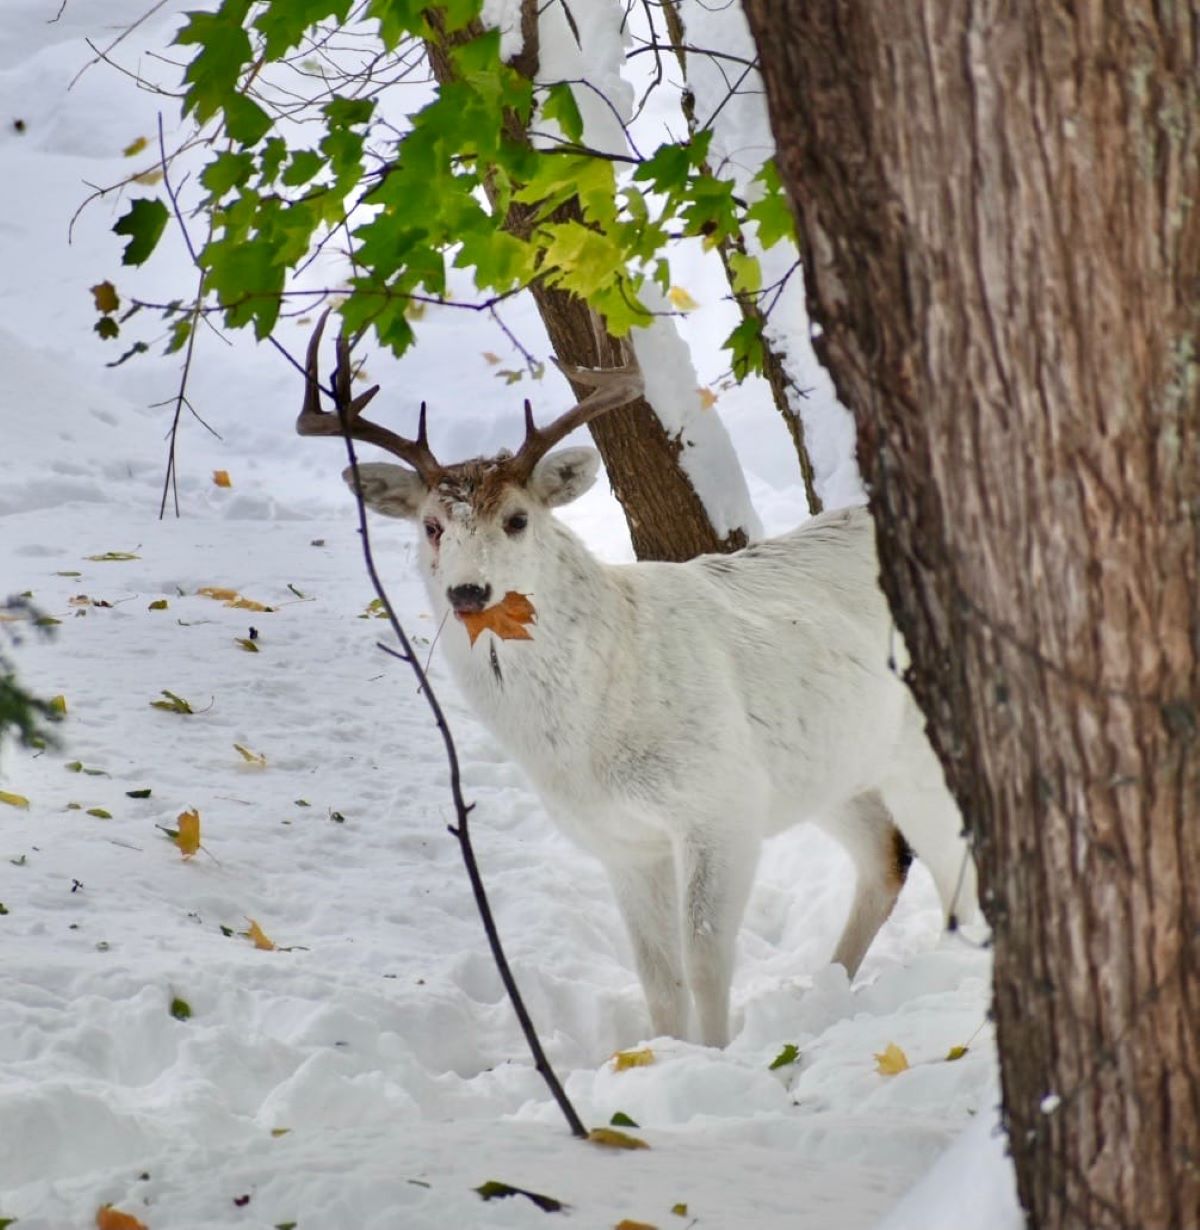 Beautiful Photos Show Majestic White Deer in Snowy New York